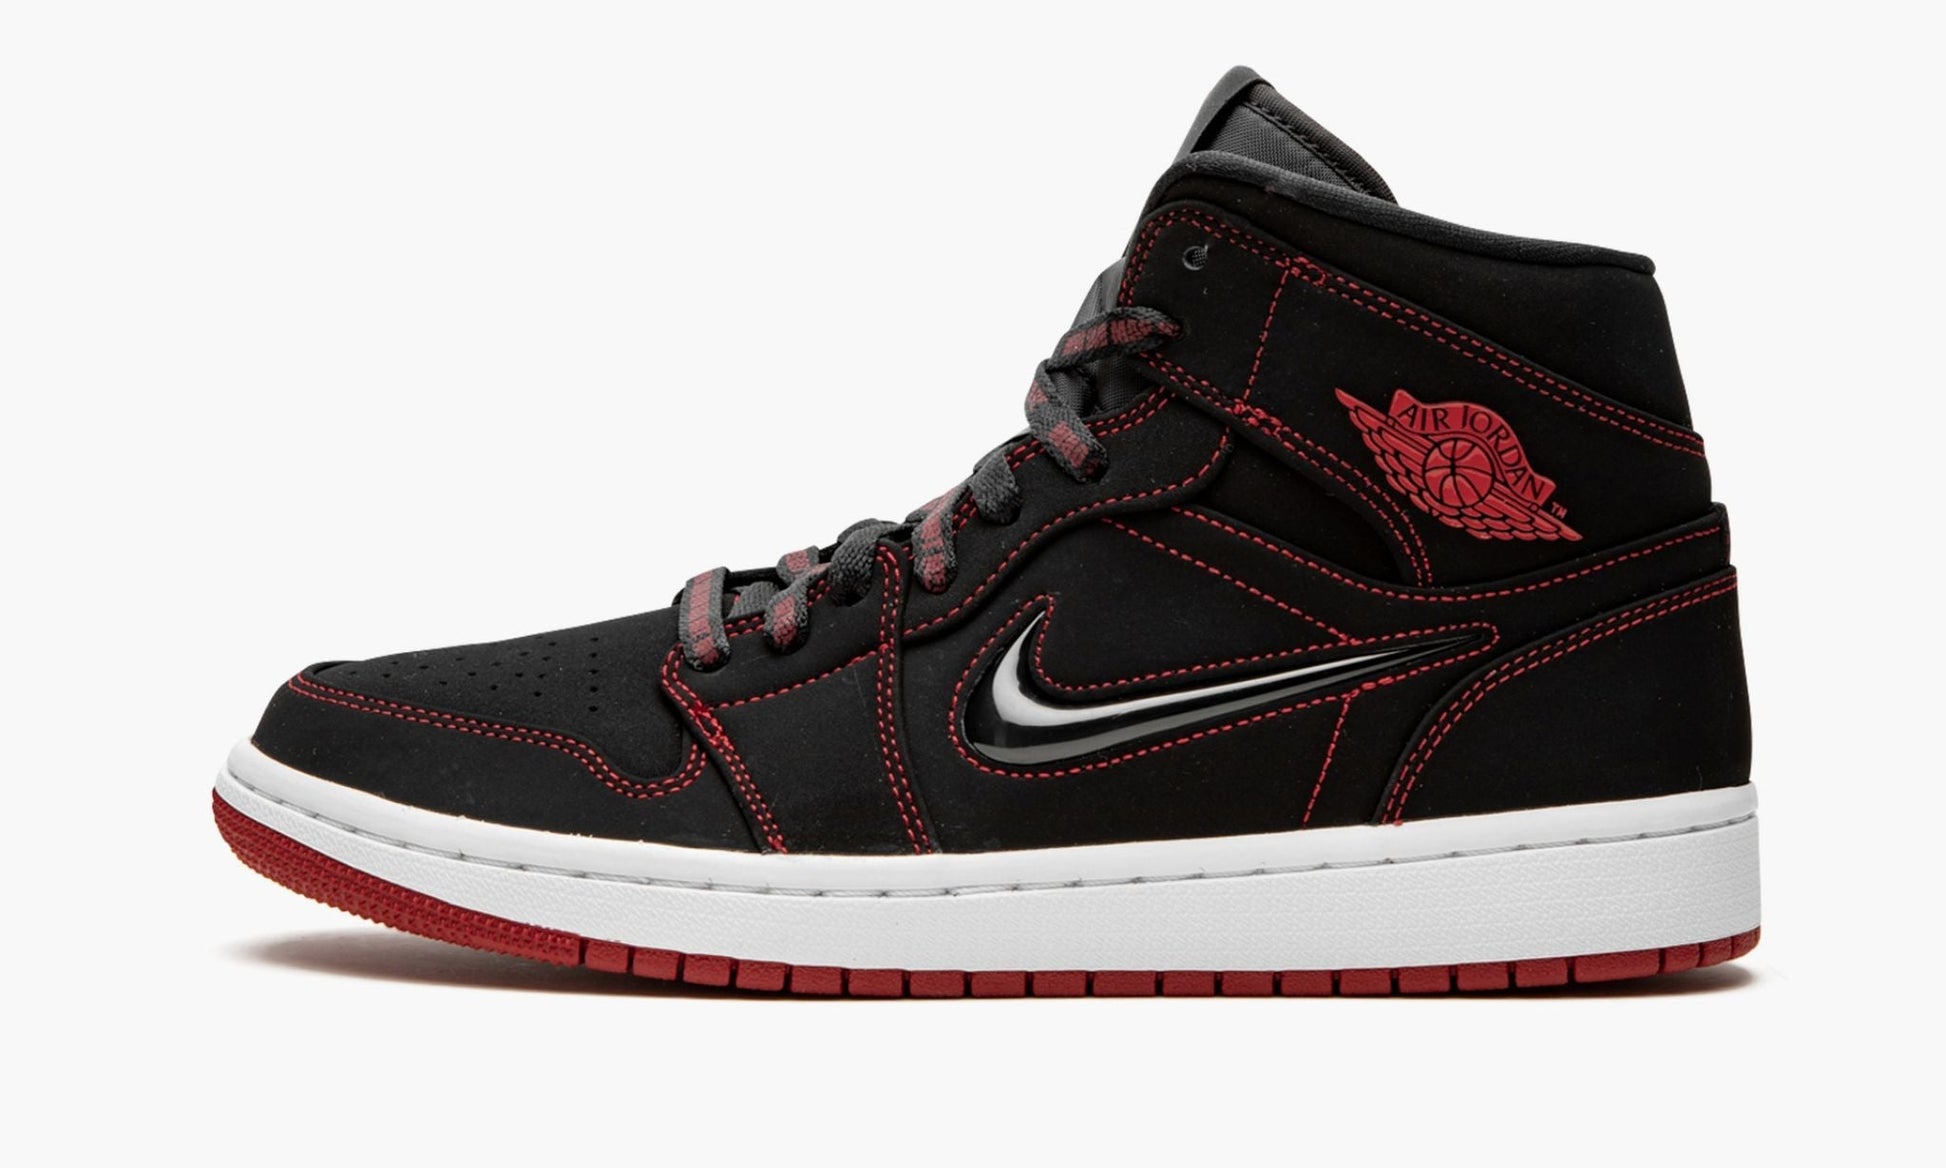 Air Jordan 1 MID "Fearless - Come Fly With Me"